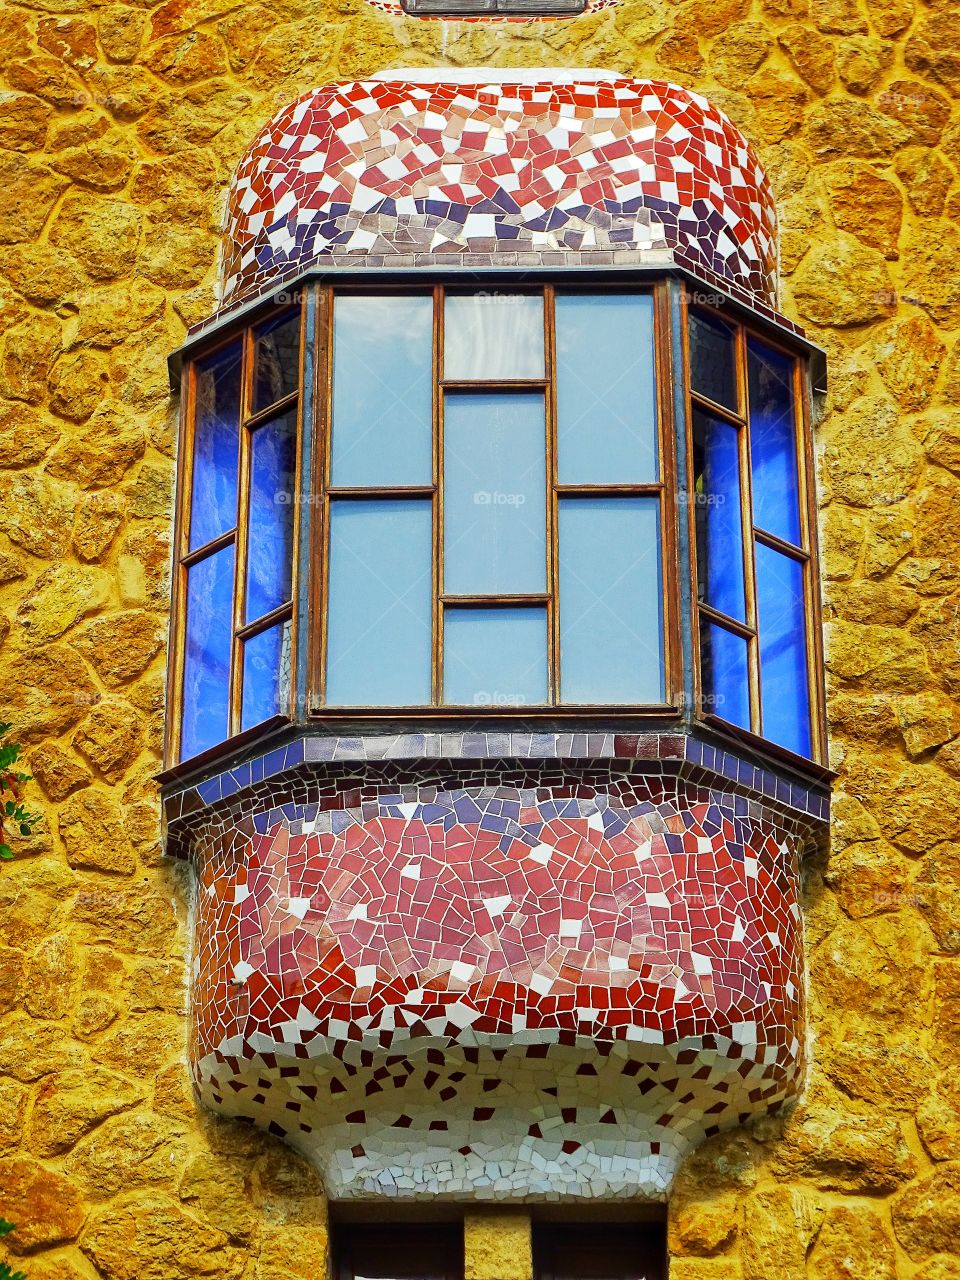 The color of Gaudí's window